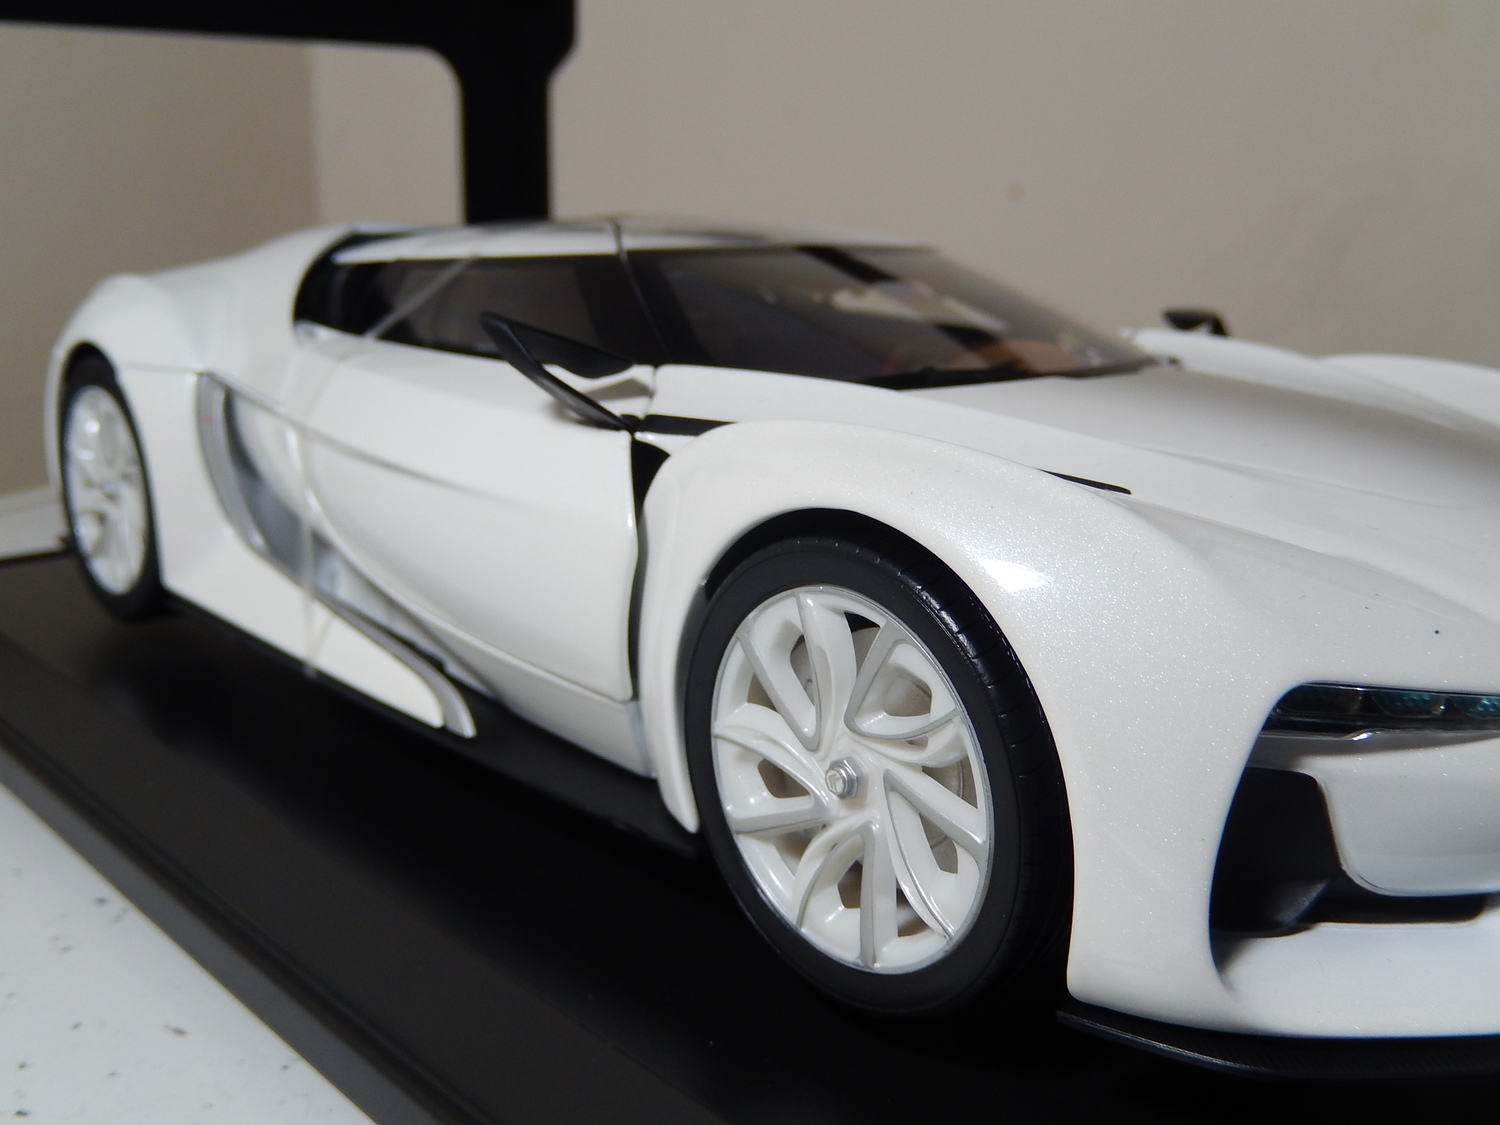 Citroen Gt Concept Car 08 By Norev 1 18 Scale Cs Diecast Tuning